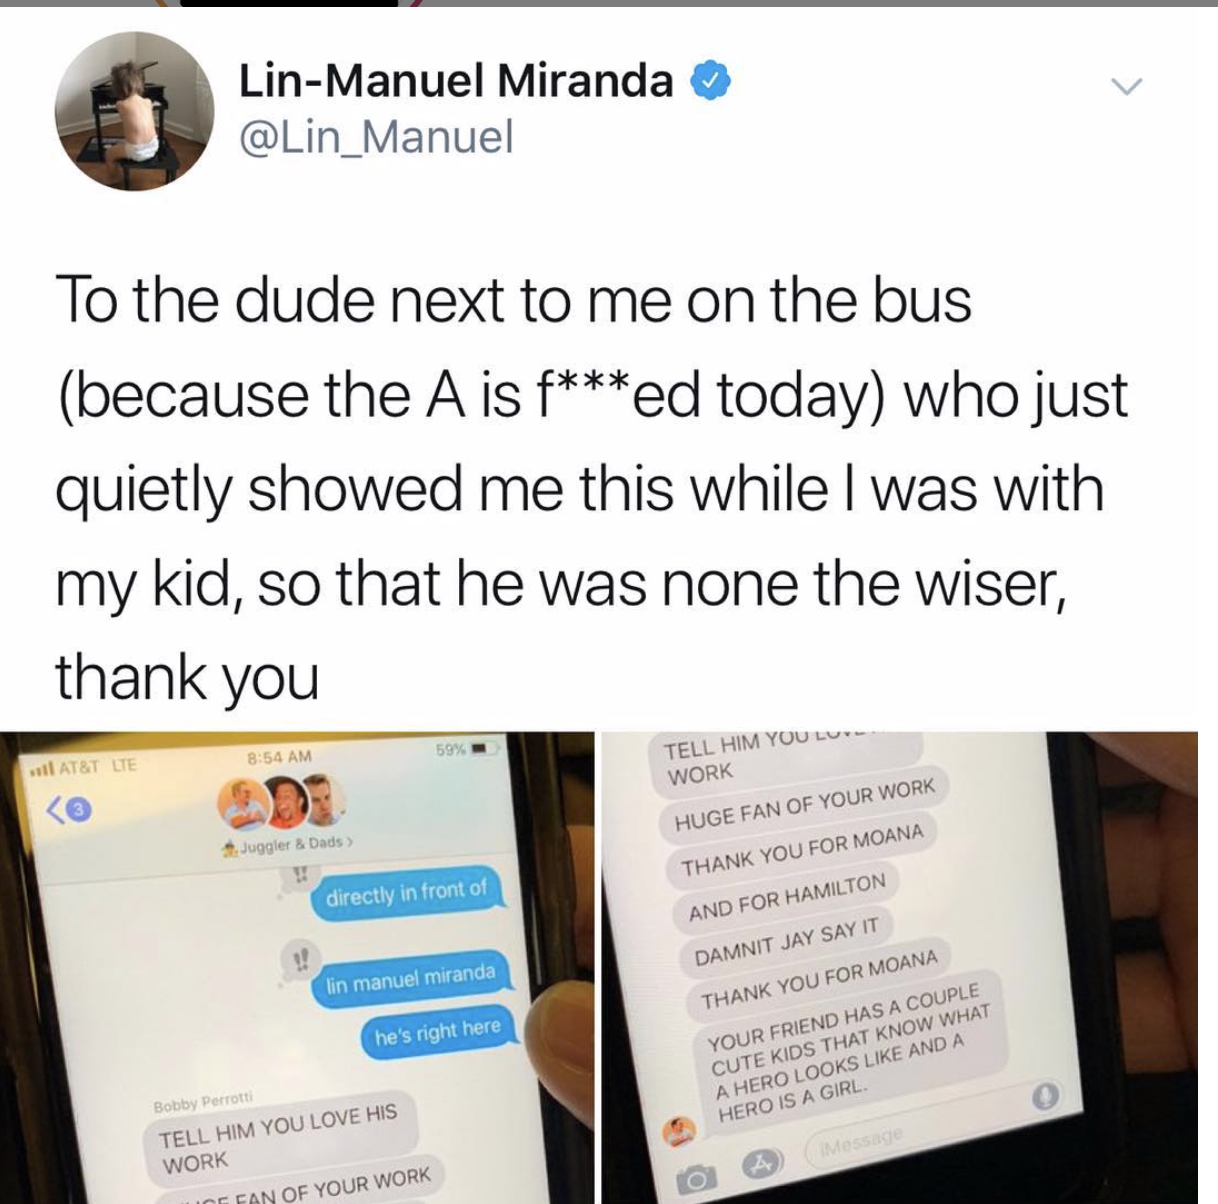 cute lin manuel miranda - LinManuel Miranda To the dude next to me on the bus because the A is fed today who just quietly showed me this while I was with my kid, so that he was none the wiser, thank you Tell Him You directly in front of Work Huge Fan Of Y